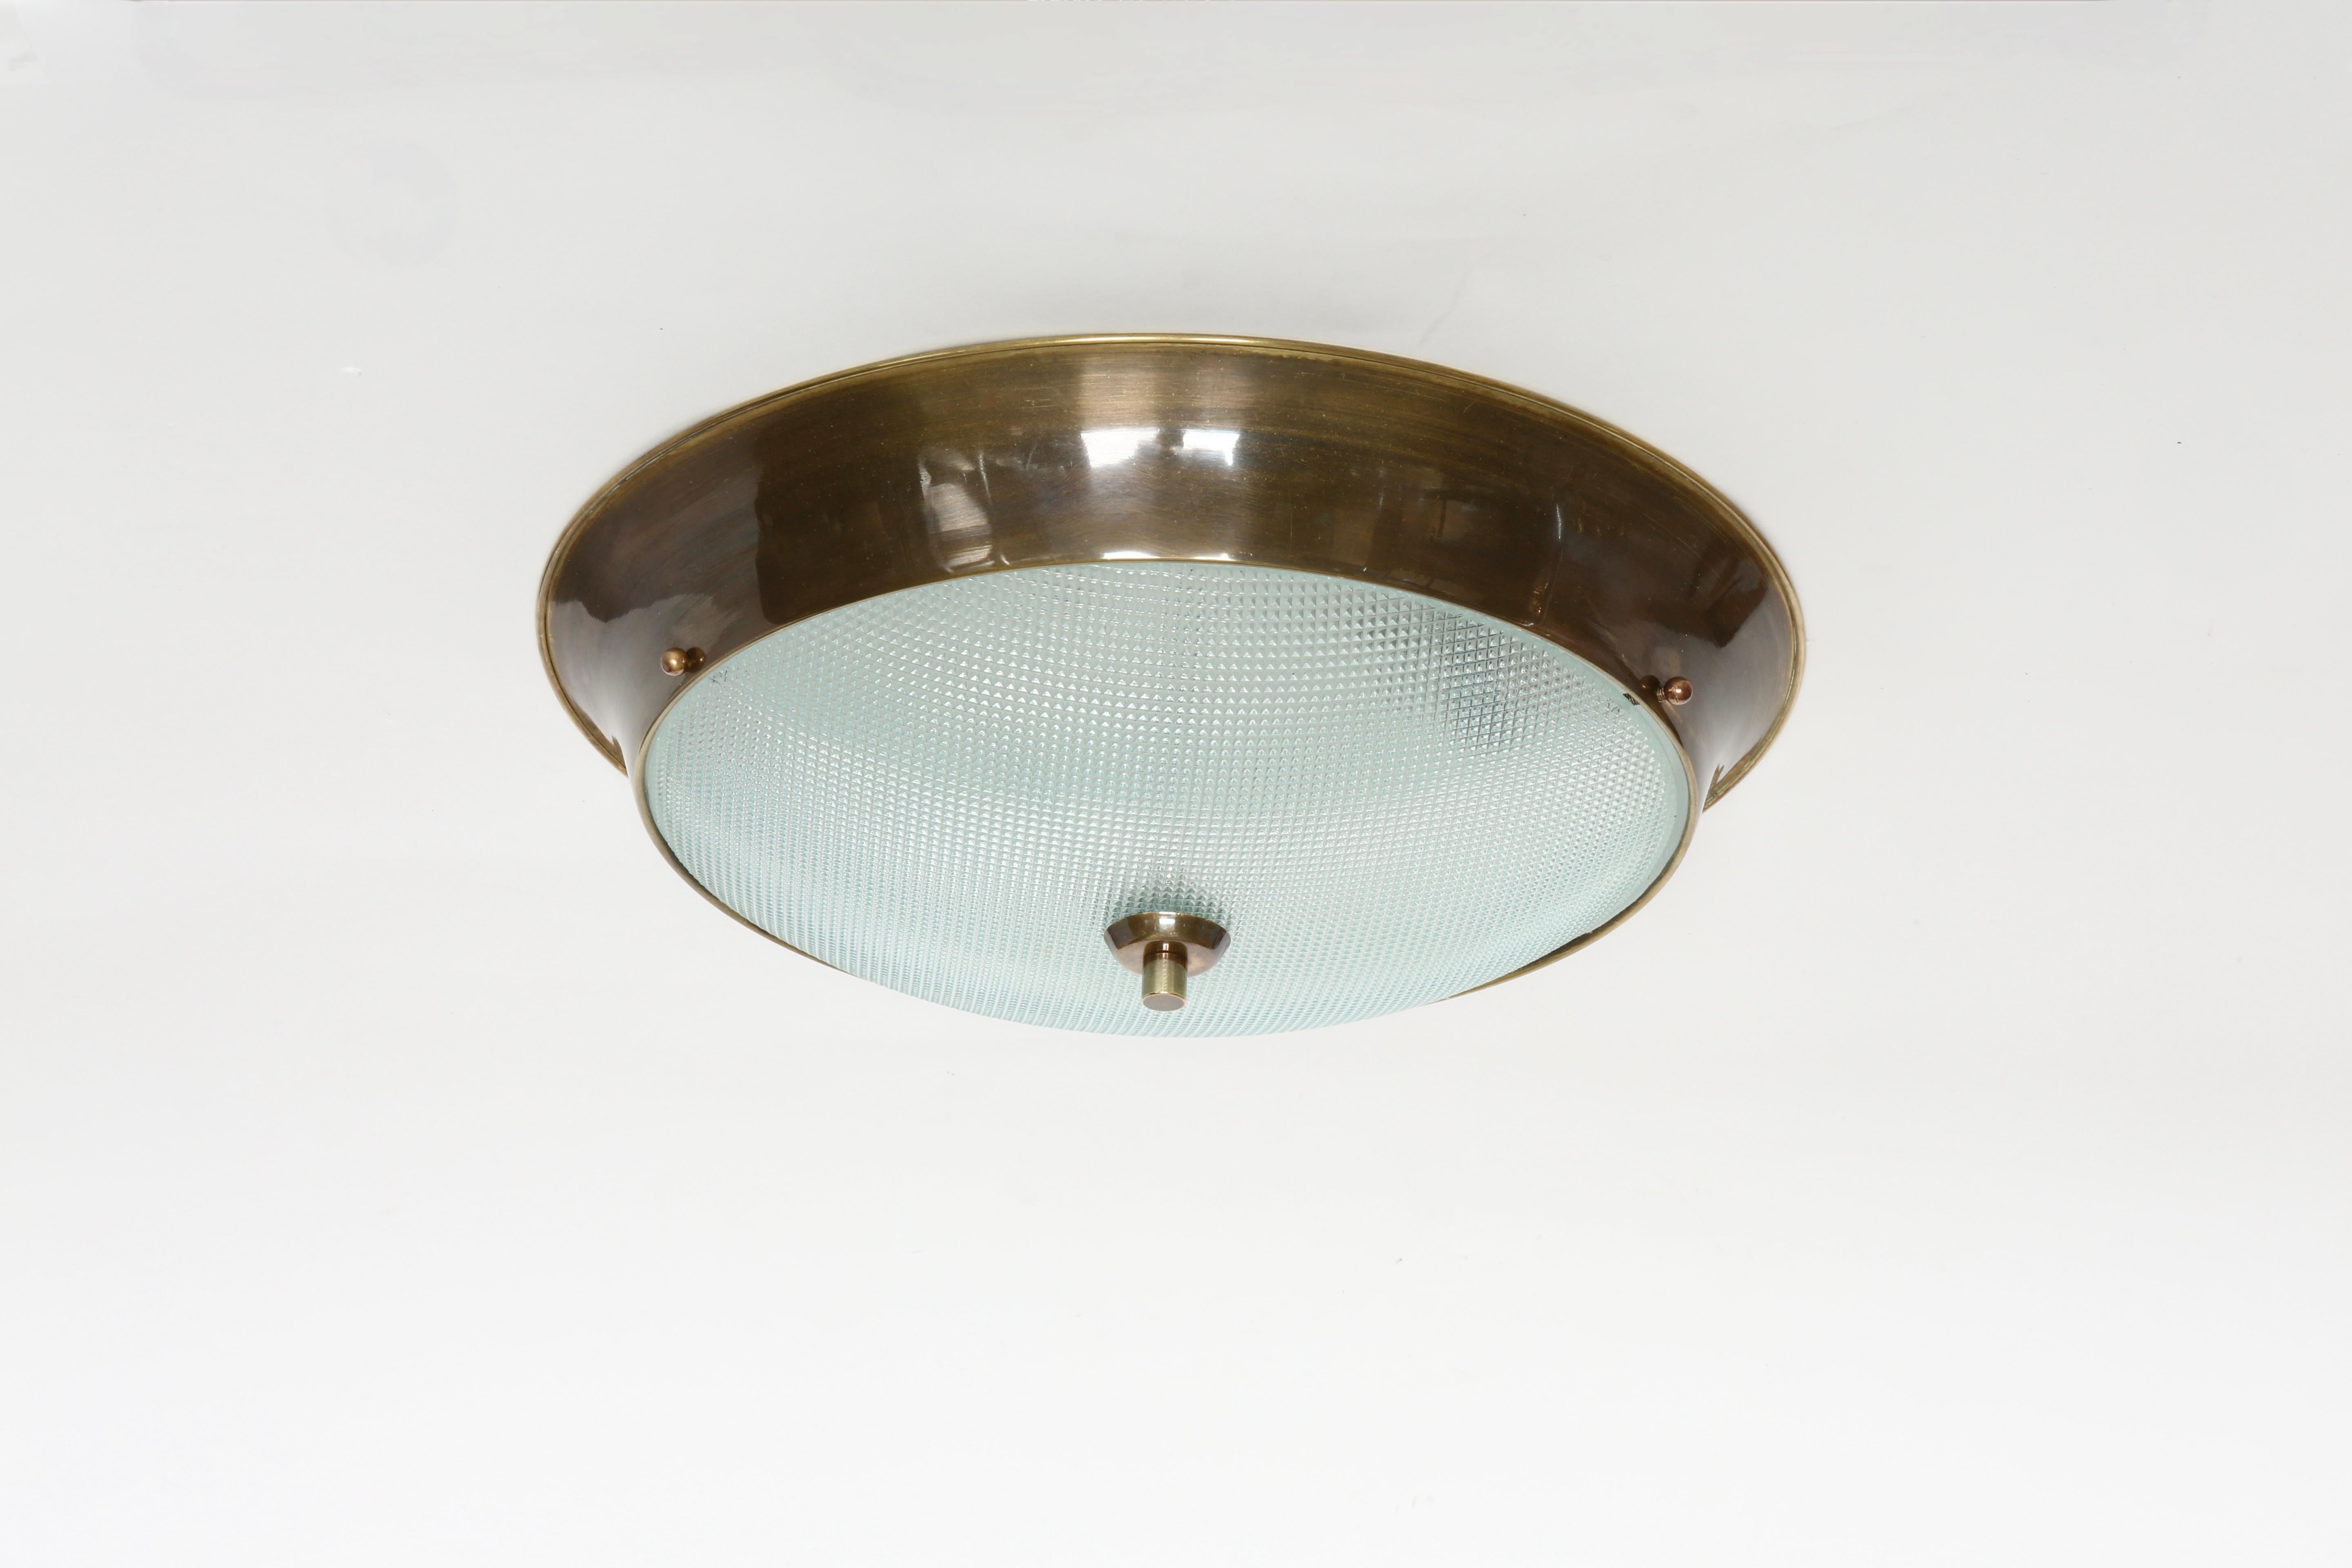 Flush mount ceiling light.
Designed and made in Italy in 1960s
Textured glass, patinated brass.
Takes 2 Edison bulbs.
Complimentary US rewiring upon request.
Four flush mounts are available.
Priced is for one light.

We take pride in bringing